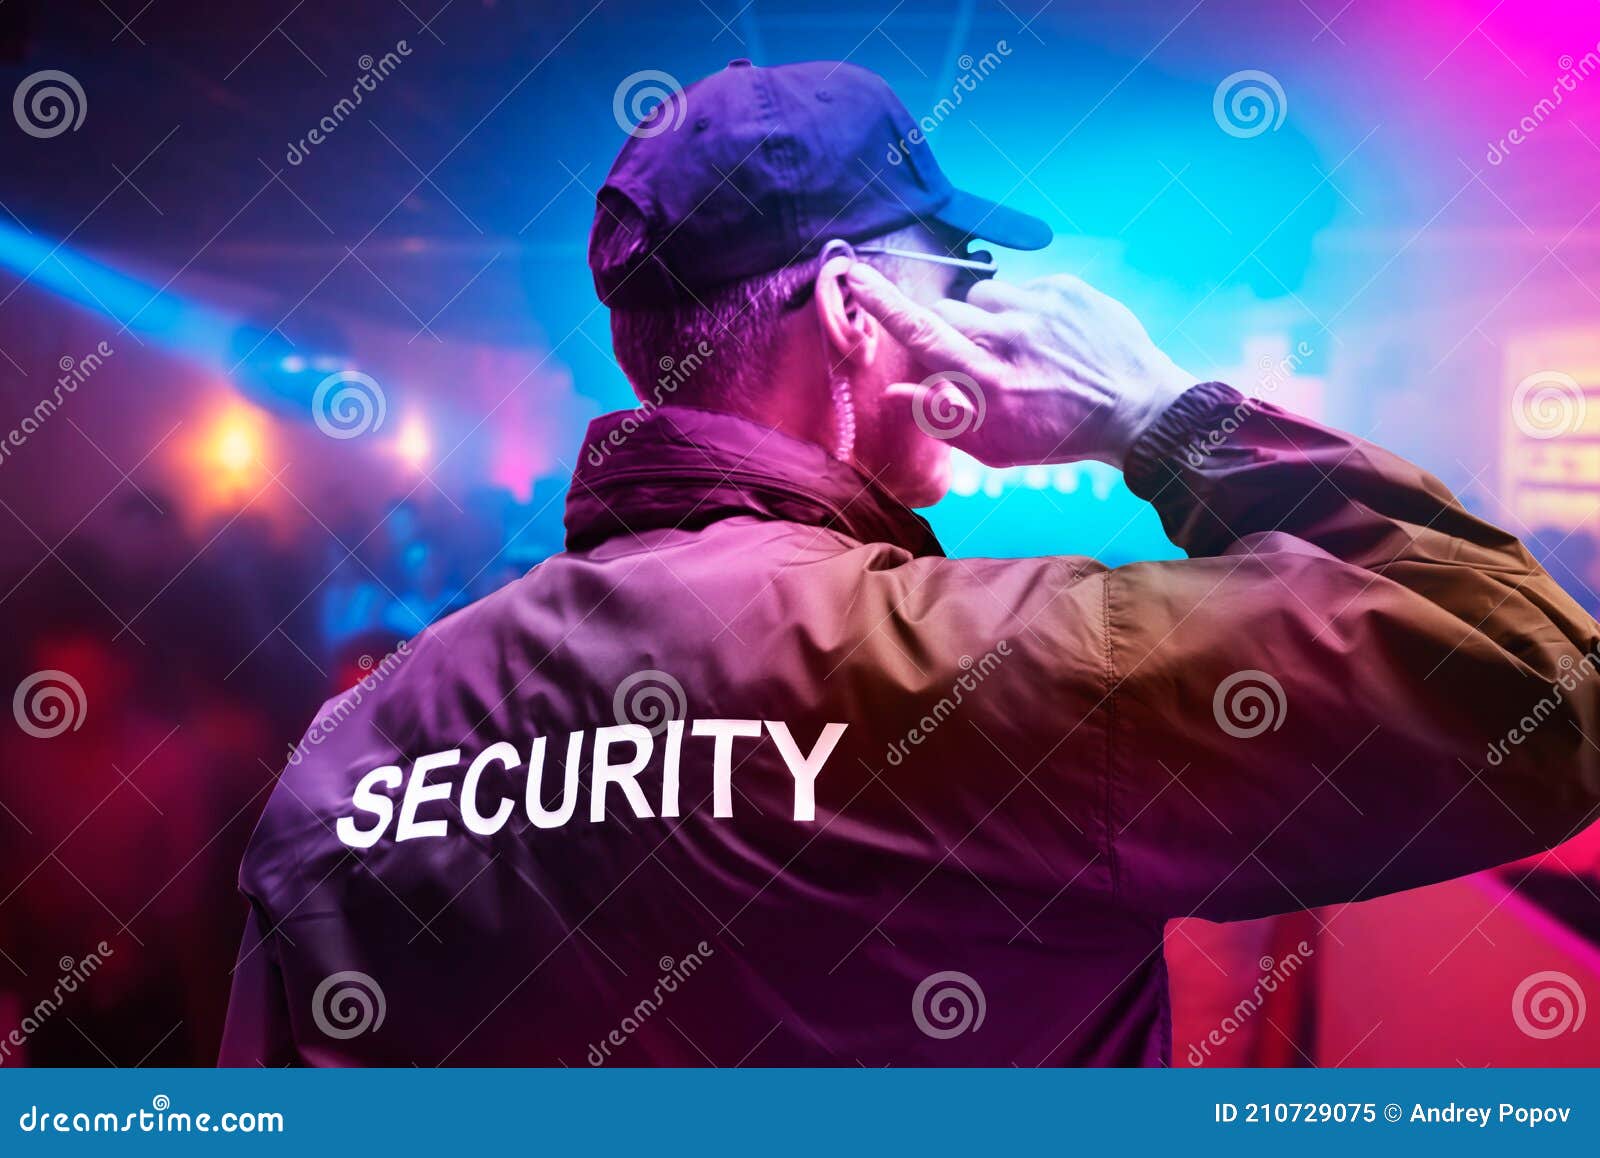 male security officer with earphones in night club